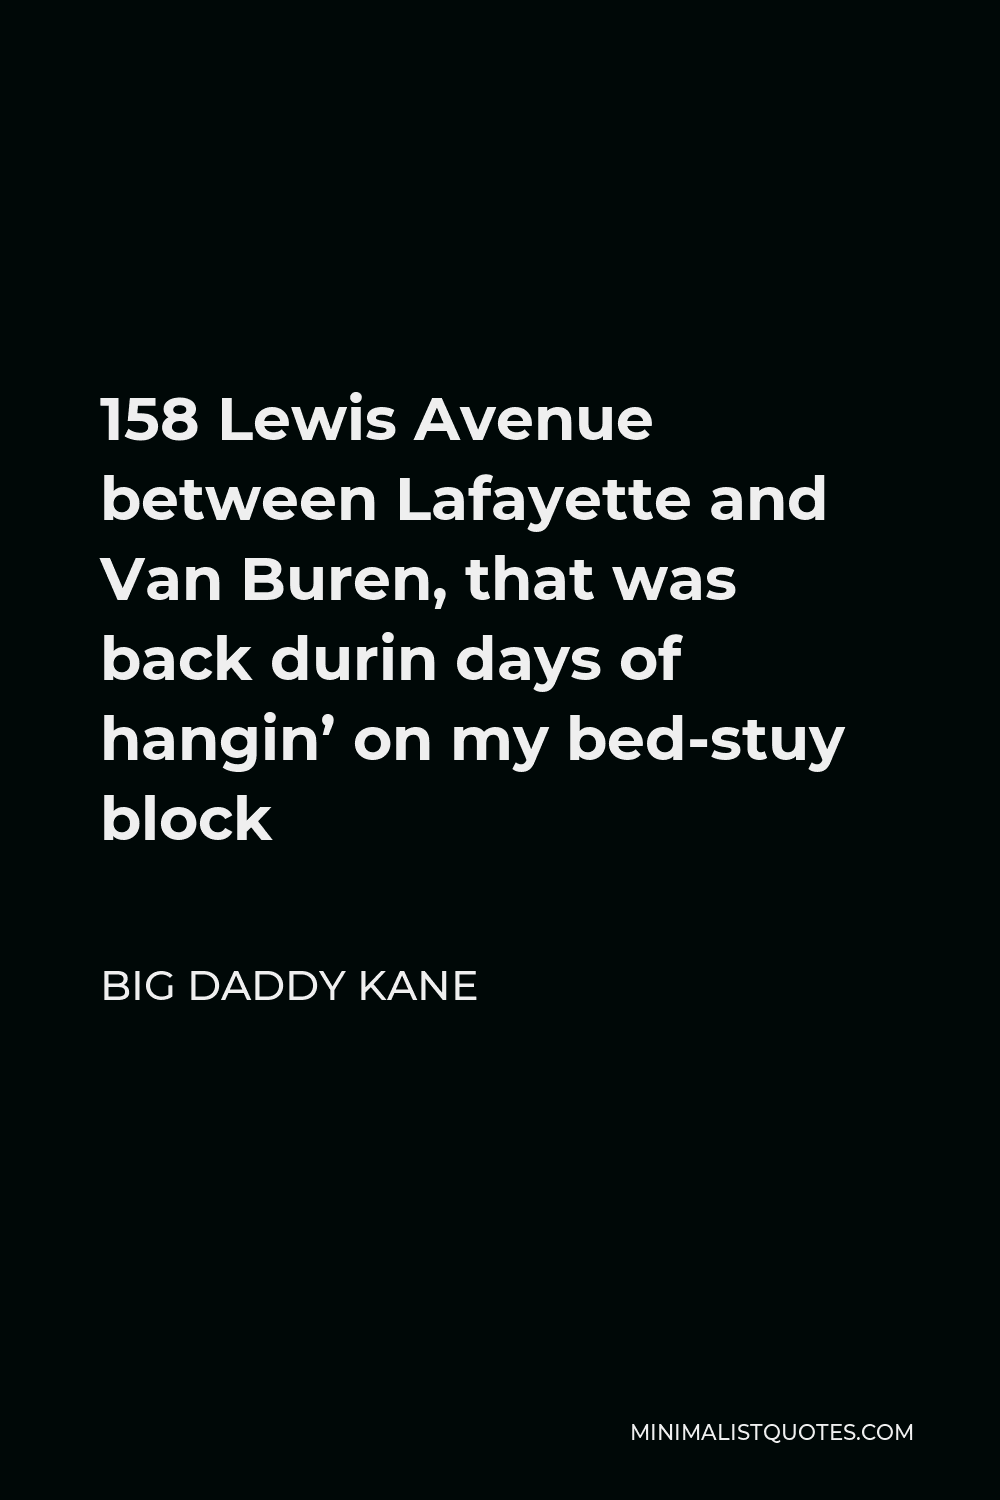 Big Daddy Kane Quote - 158 Lewis Avenue between Lafayette and Van Buren, that was back durin days of hangin’ on my bed-stuy block